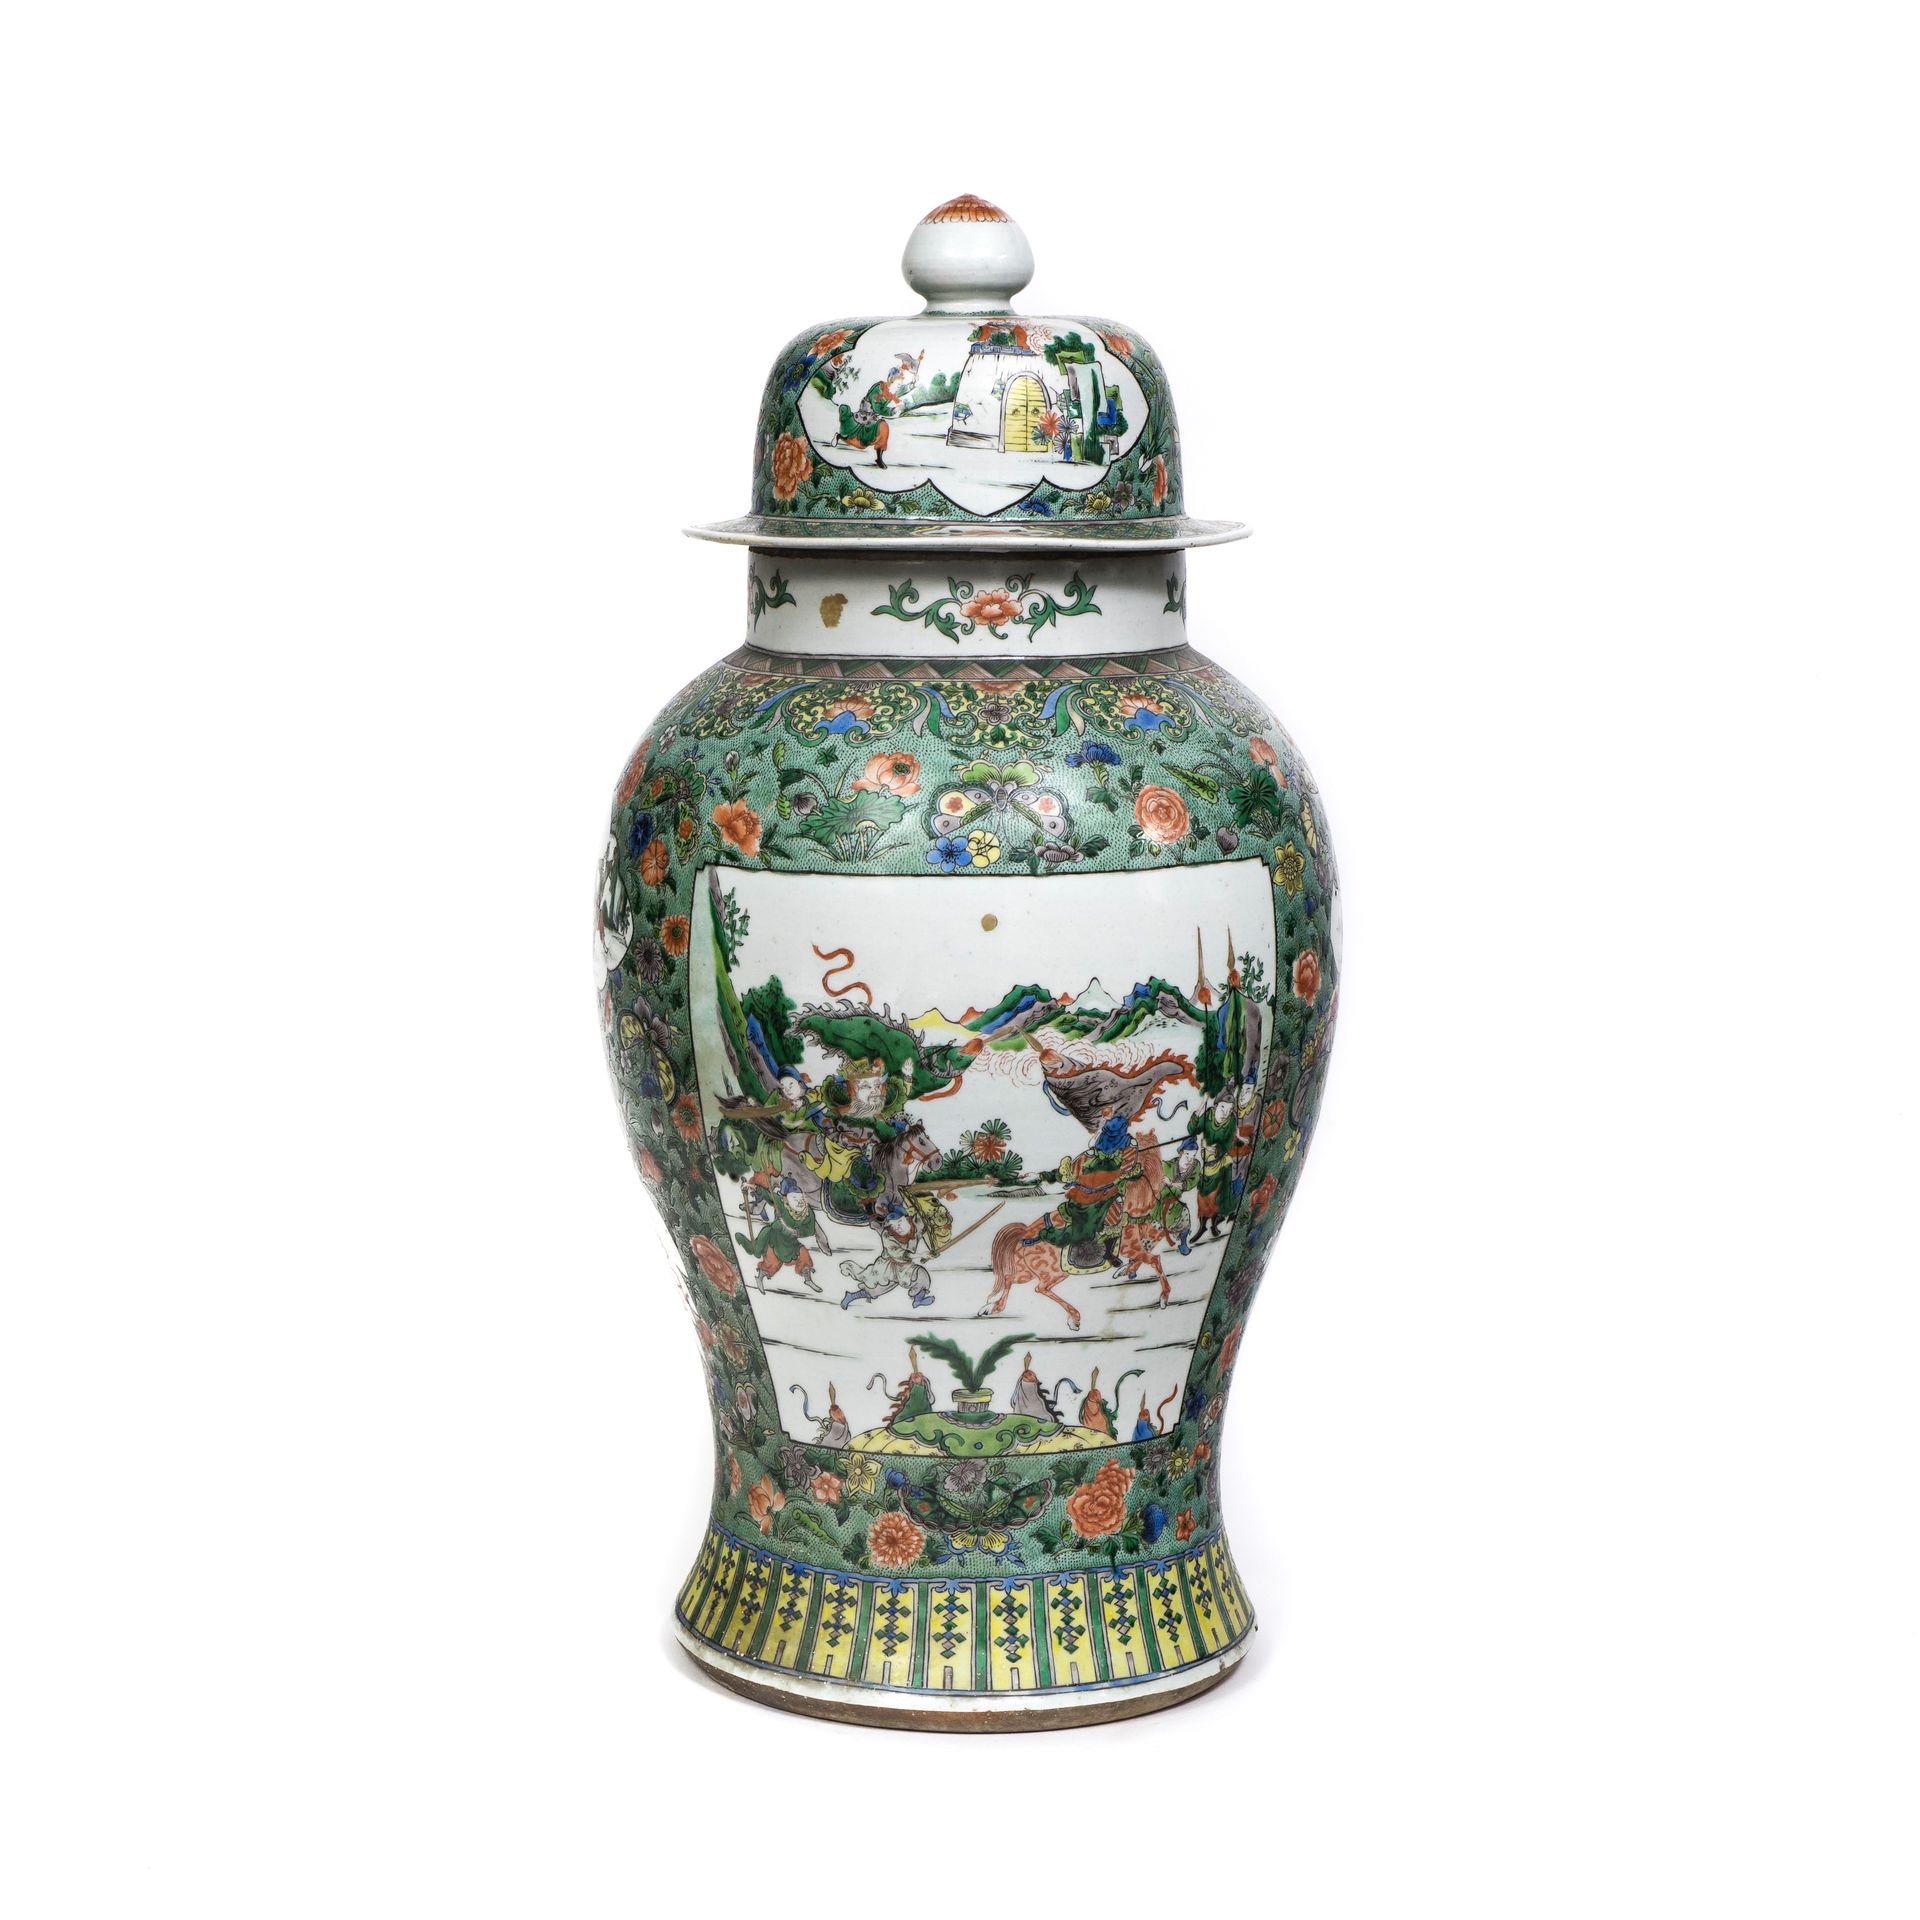 Null Large potiche vase

CHINA - 19TH CENTURY

Large porcelain potiche with Fami&hellip;